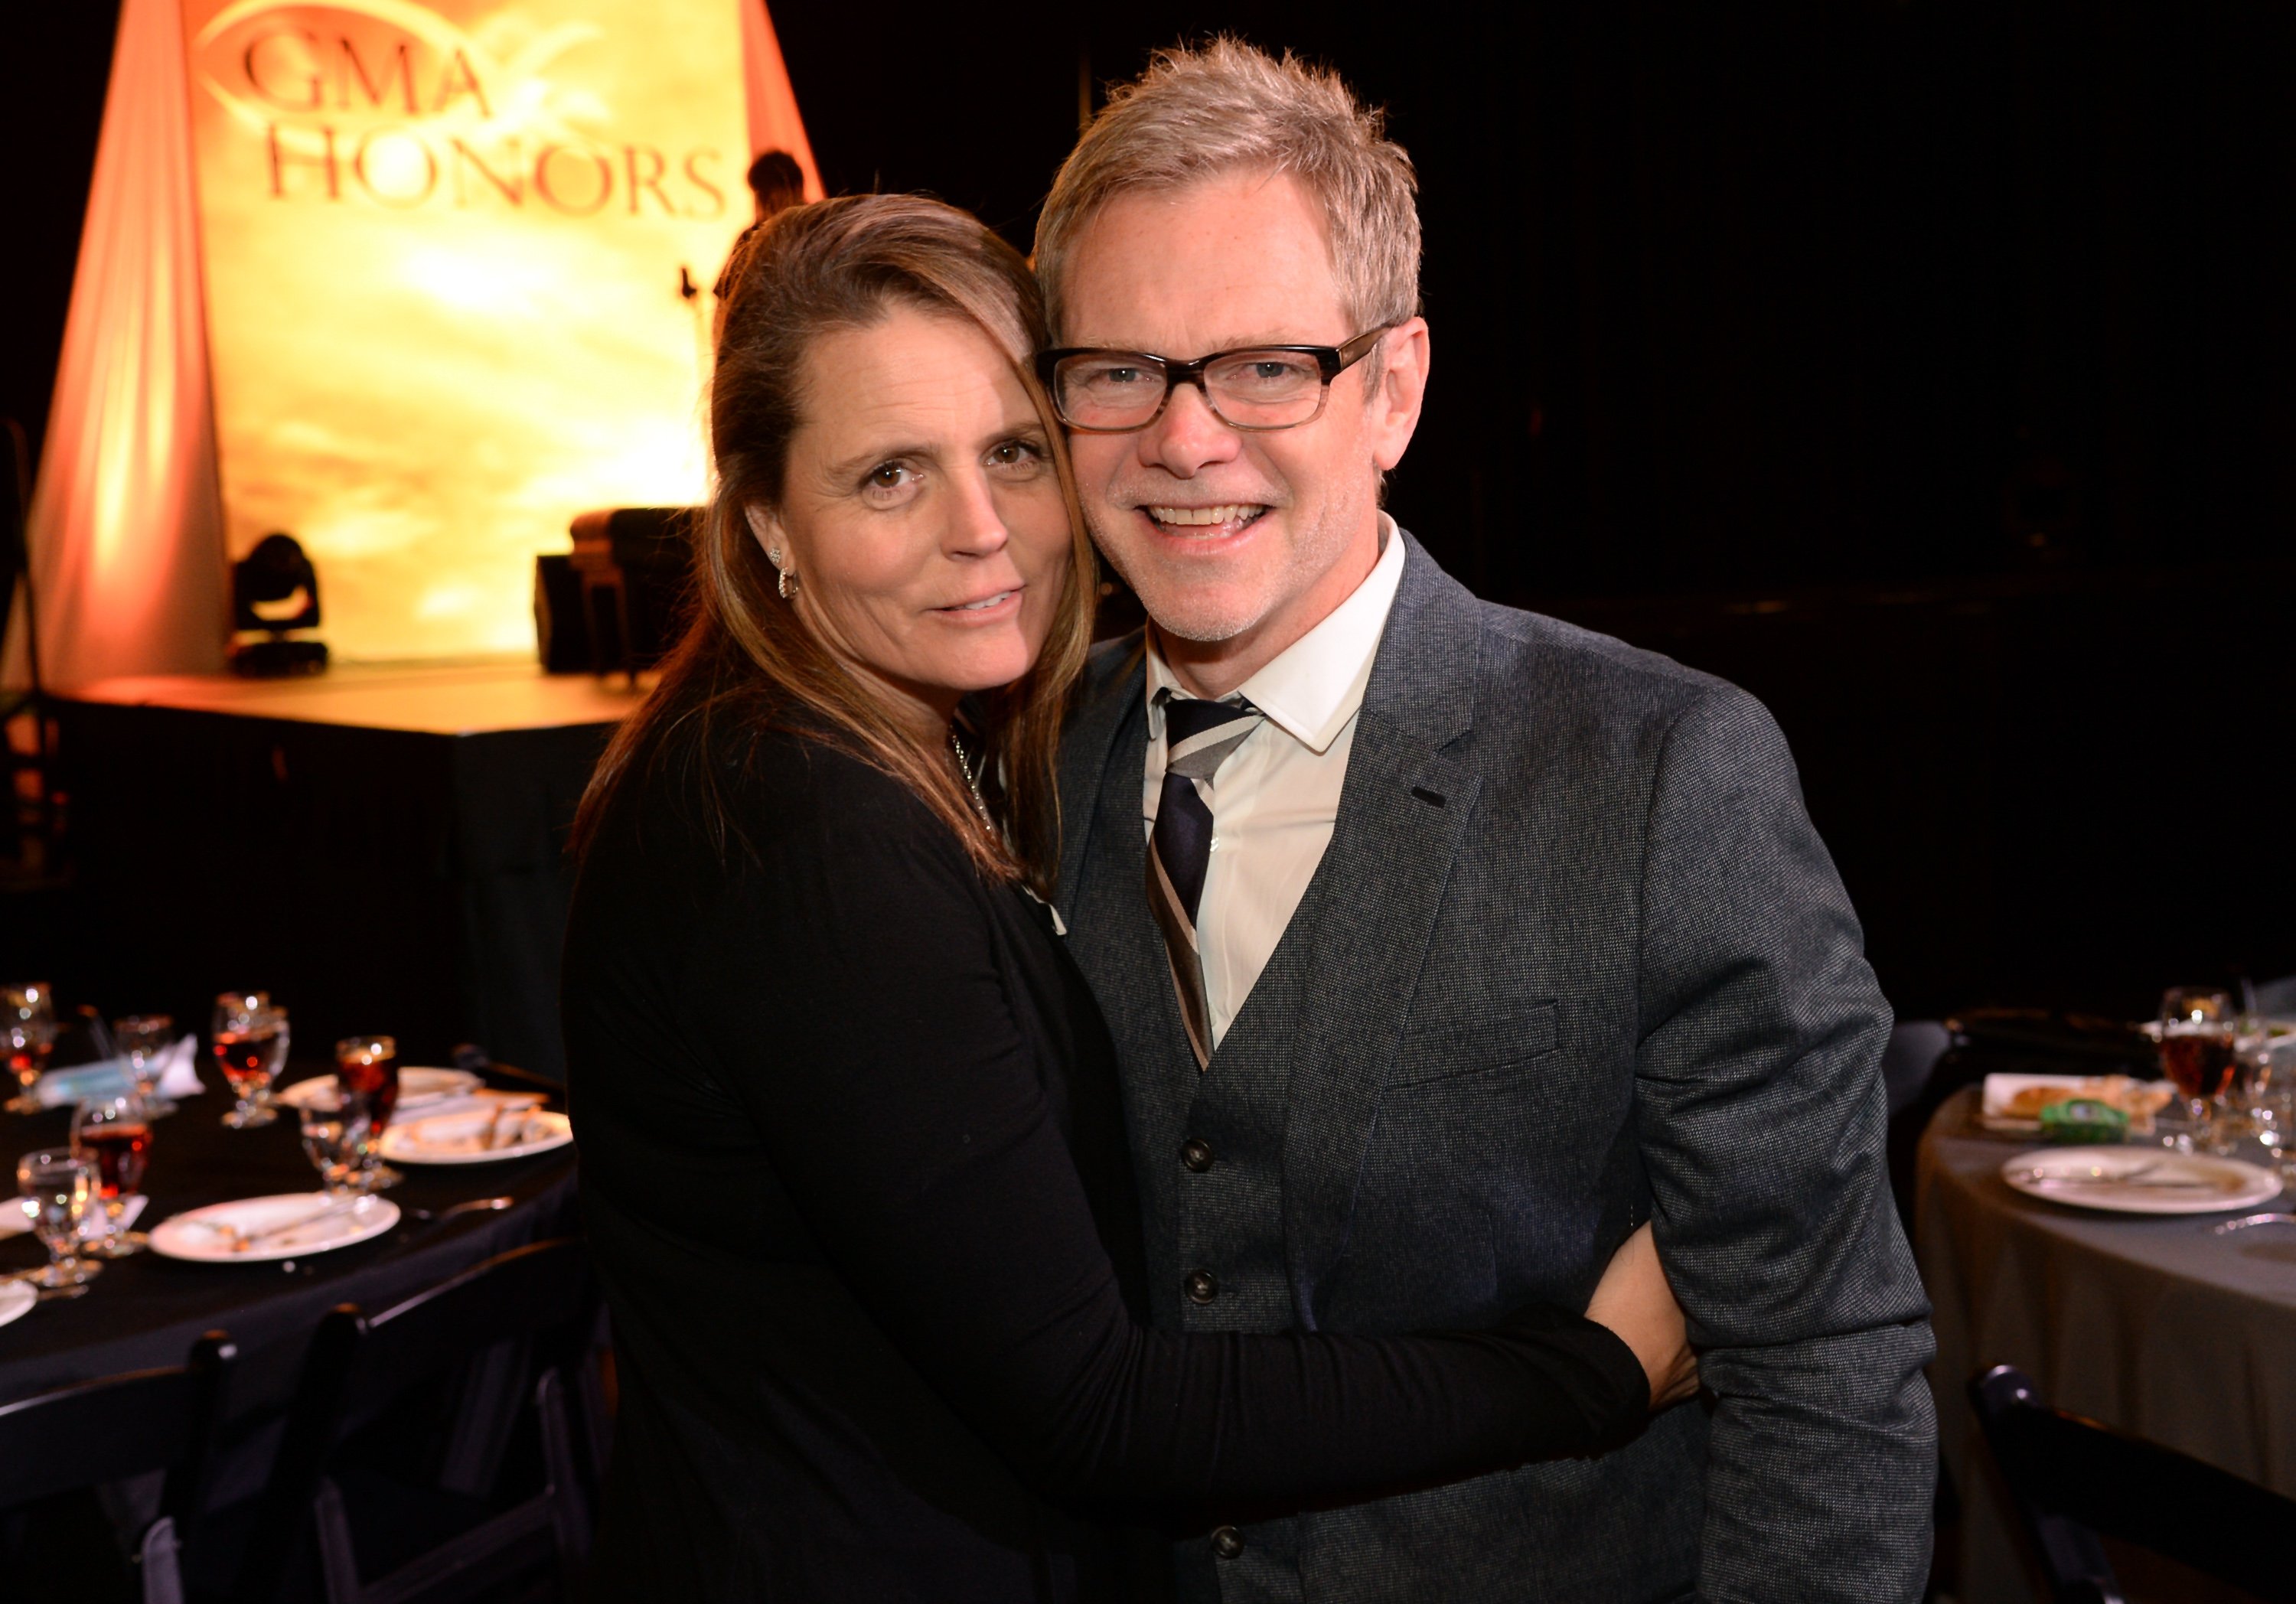 Mary Beth Chapman and Steven Curtis Chapman of Show Hope attend the GMA Honors Celebration and Hall of Fame Induction at the Allen Arena at Lipscomb University on April 29, 2014 in Nashville, Tennessee |  Source: Getty Images